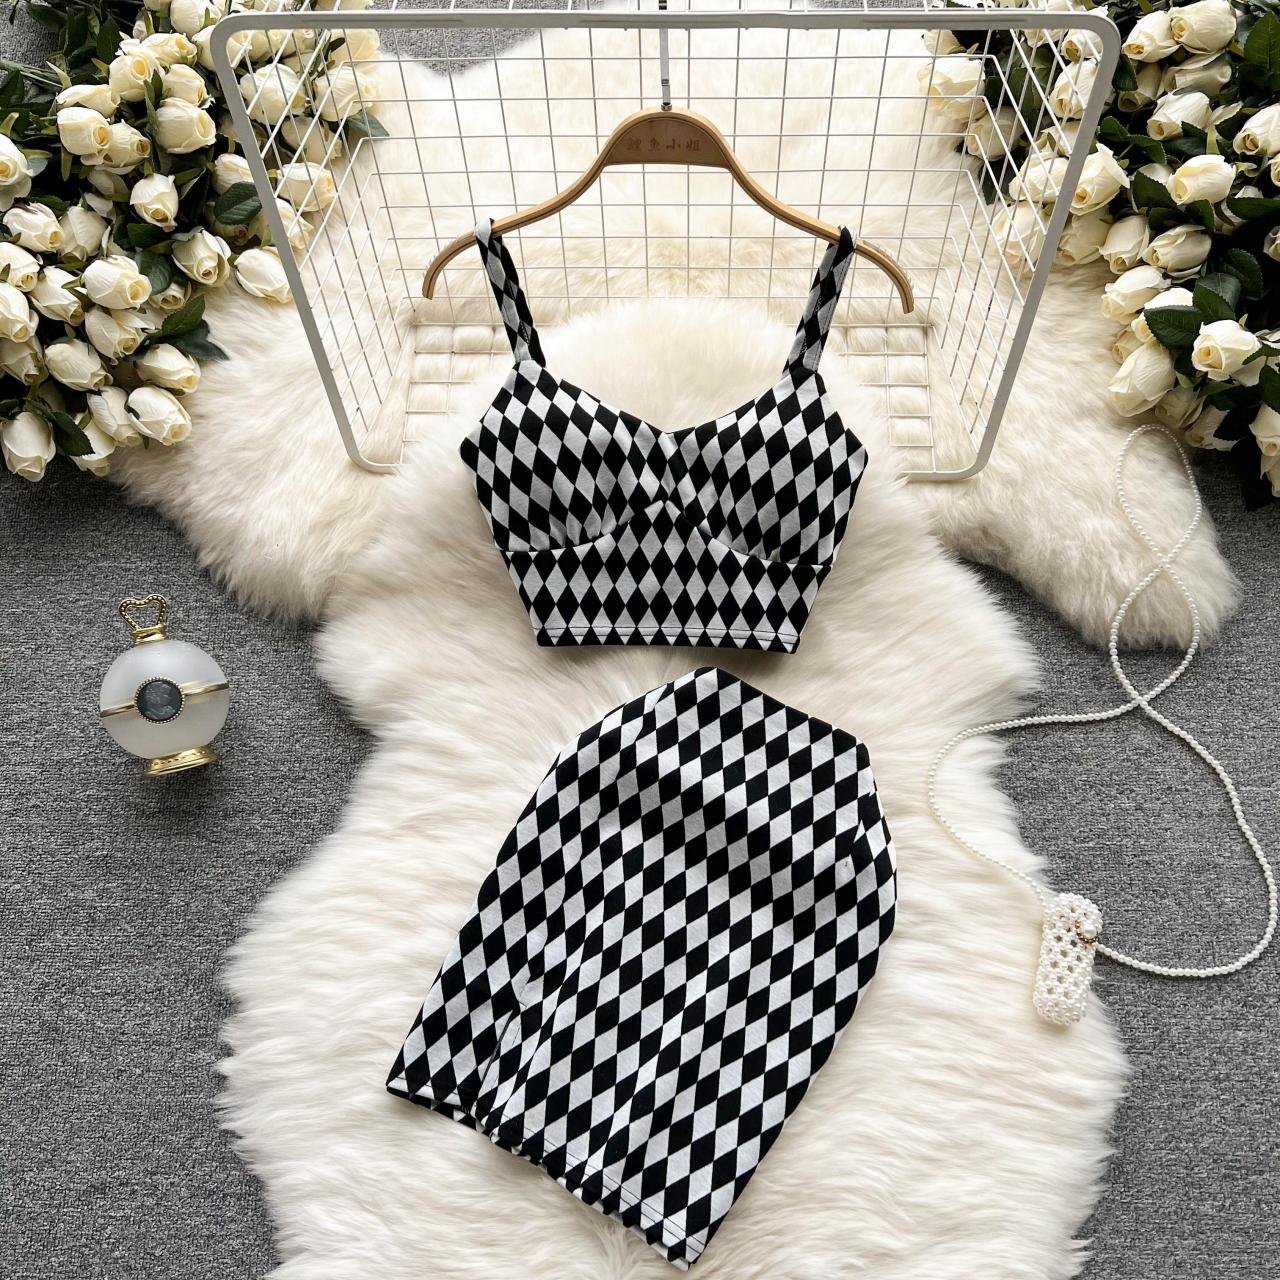 Women's 2 Piece Outfit Checkerboard Crop Top And Bodycon Short Skirt Set